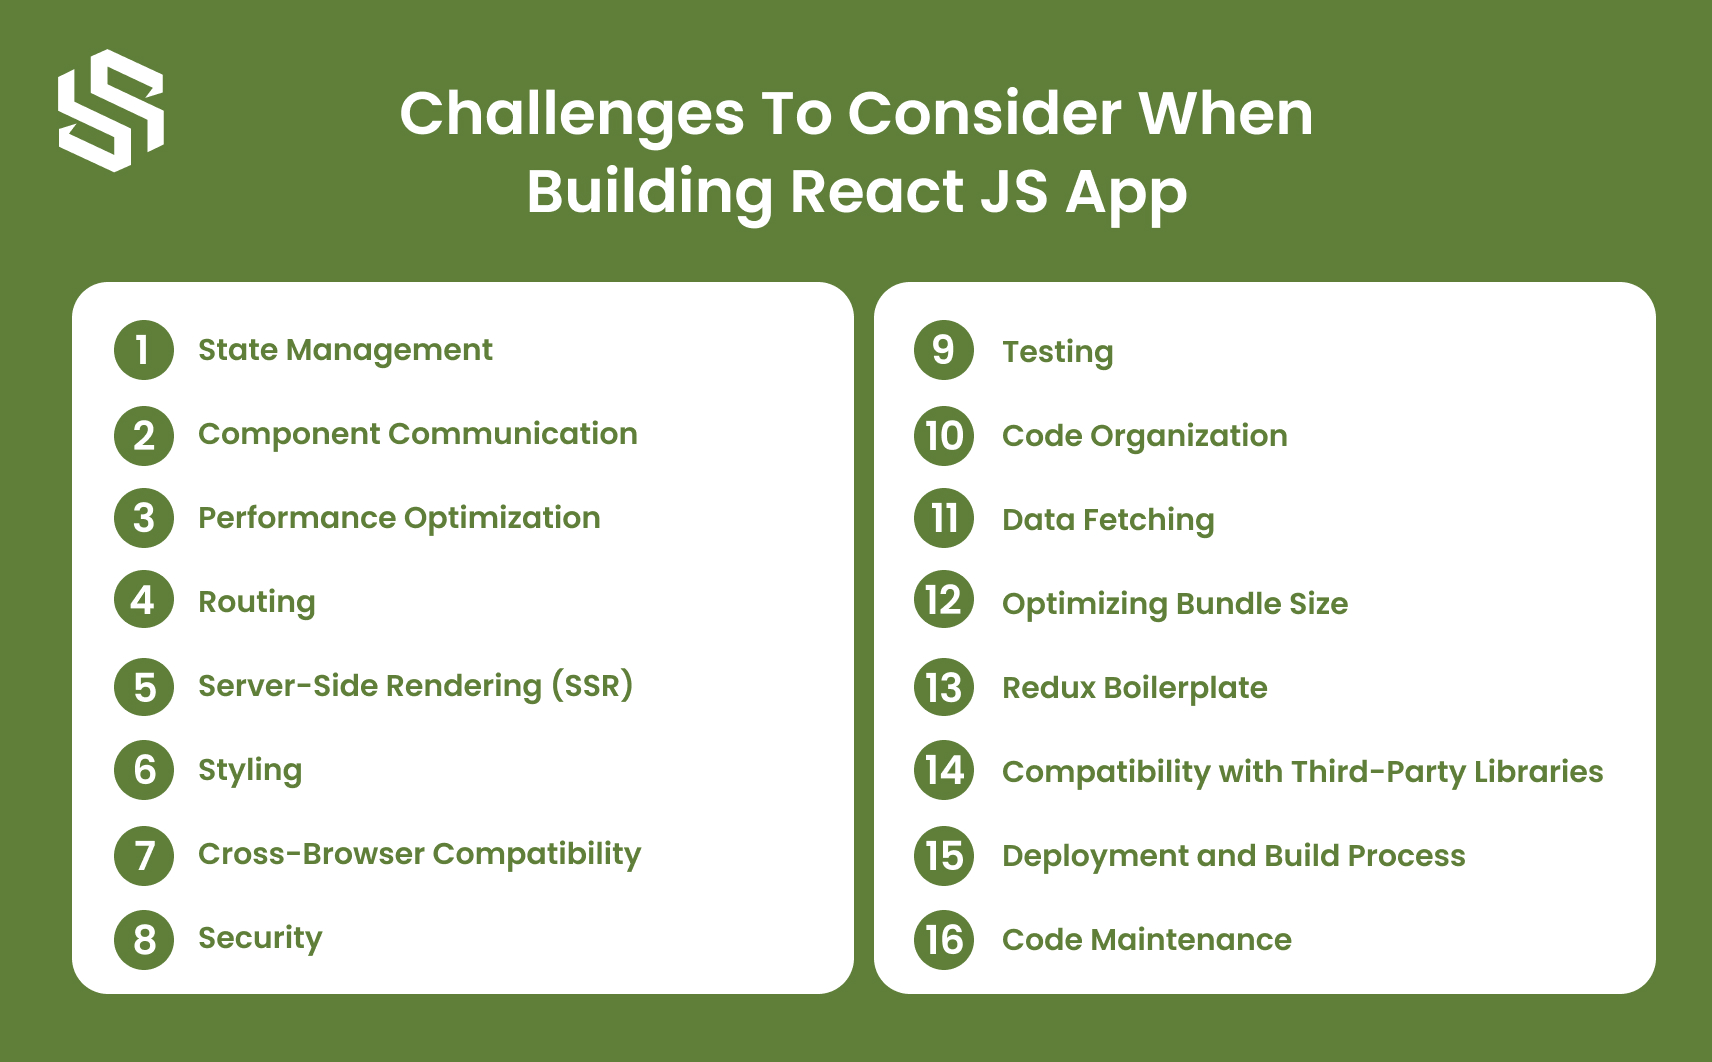 Challenges To Consider When Building React JS App